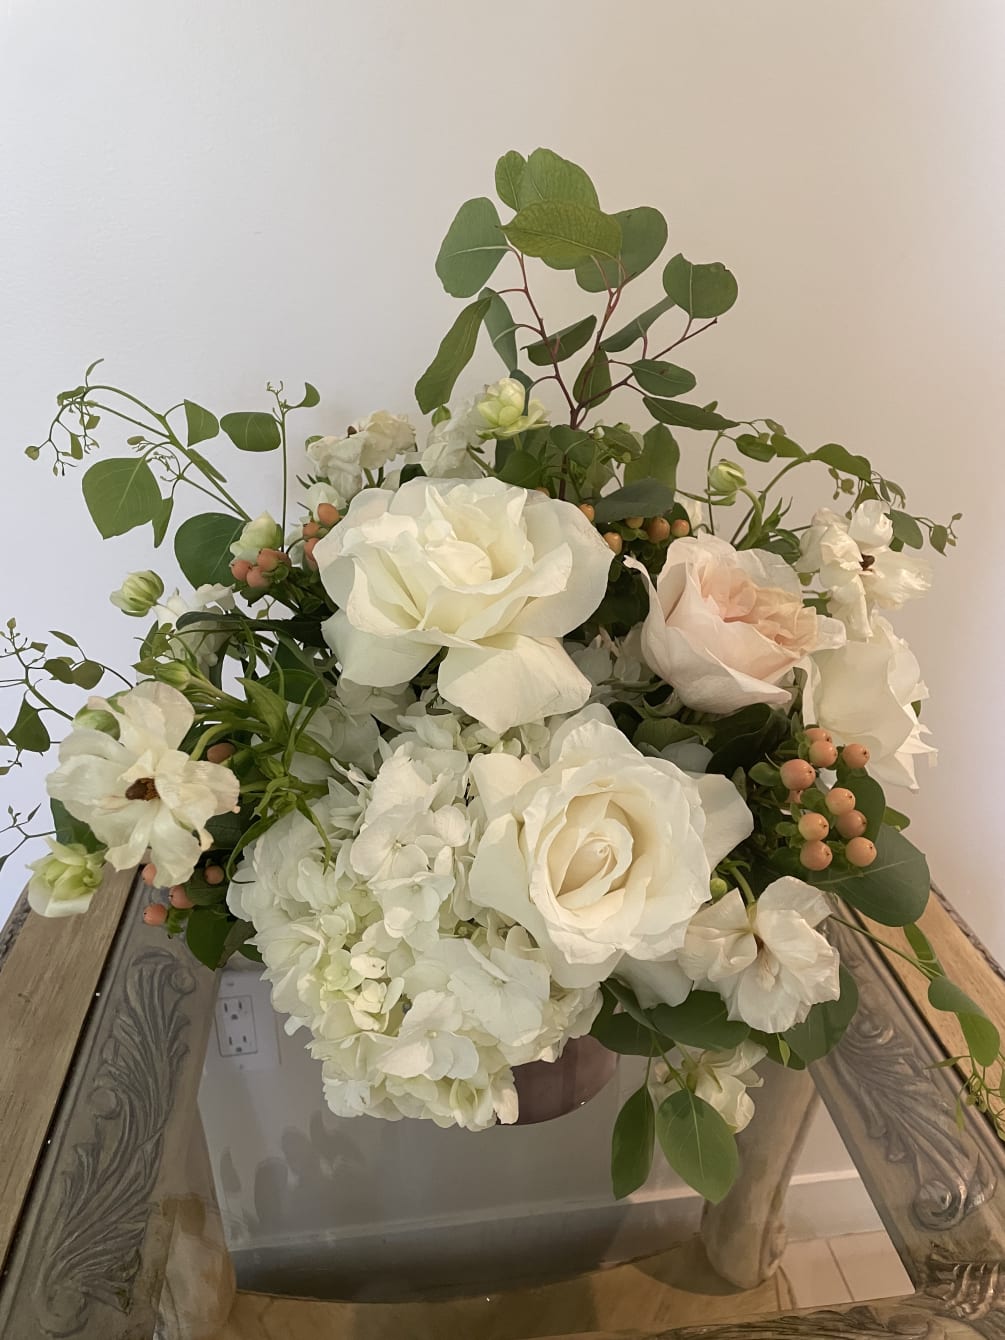 Soft pastel roses, white roses, white hydrangea and ranunculus accented by eucalyptus